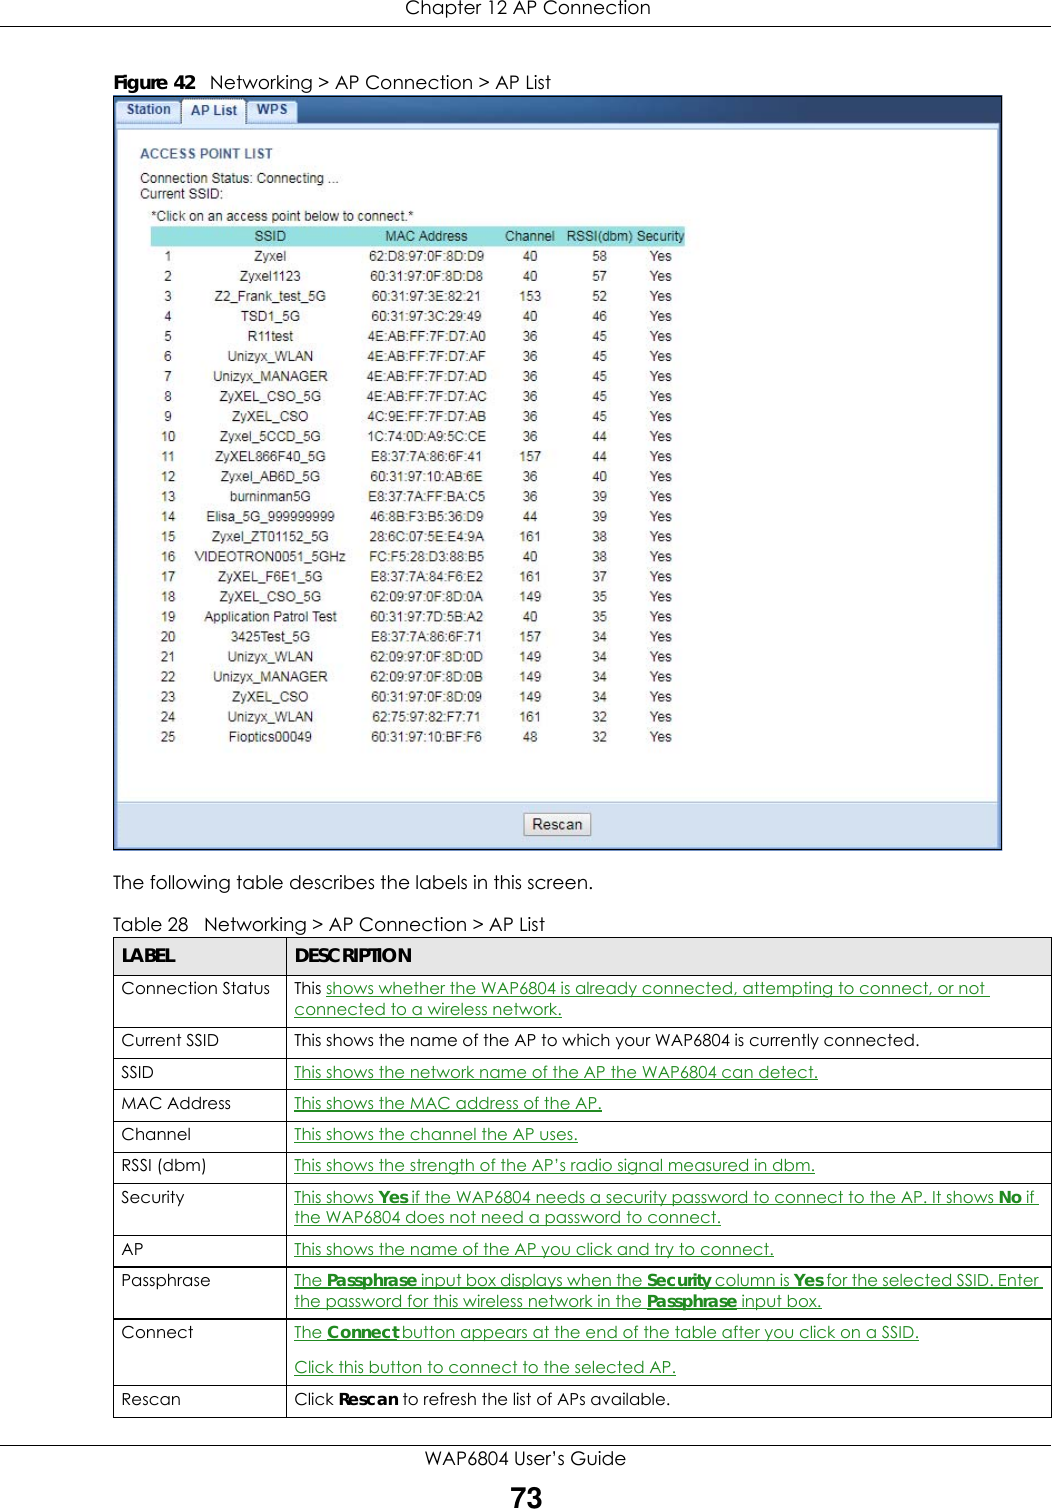  Chapter 12 AP ConnectionWAP6804 User’s Guide73Figure 42   Networking &gt; AP Connection &gt; AP List  The following table describes the labels in this screen. Table 28   Networking &gt; AP Connection &gt; AP ListLABEL DESCRIPTIONConnection Status This shows whether the WAP6804 is already connected, attempting to connect, or not connected to a wireless network.Current SSID This shows the name of the AP to which your WAP6804 is currently connected.SSID This shows the network name of the AP the WAP6804 can detect.MAC Address This shows the MAC address of the AP.Channel This shows the channel the AP uses.RSSI (dbm) This shows the strength of the AP’s radio signal measured in dbm.Security This shows Yes if the WAP6804 needs a security password to connect to the AP. It shows No if the WAP6804 does not need a password to connect.AP This shows the name of the AP you click and try to connect.Passphrase The Passphrase input box displays when the Security column is Yes for the selected SSID. Enter the password for this wireless network in the Passphrase input box.Connect The Connect button appears at the end of the table after you click on a SSID.Click this button to connect to the selected AP.Rescan Click Rescan to refresh the list of APs available.